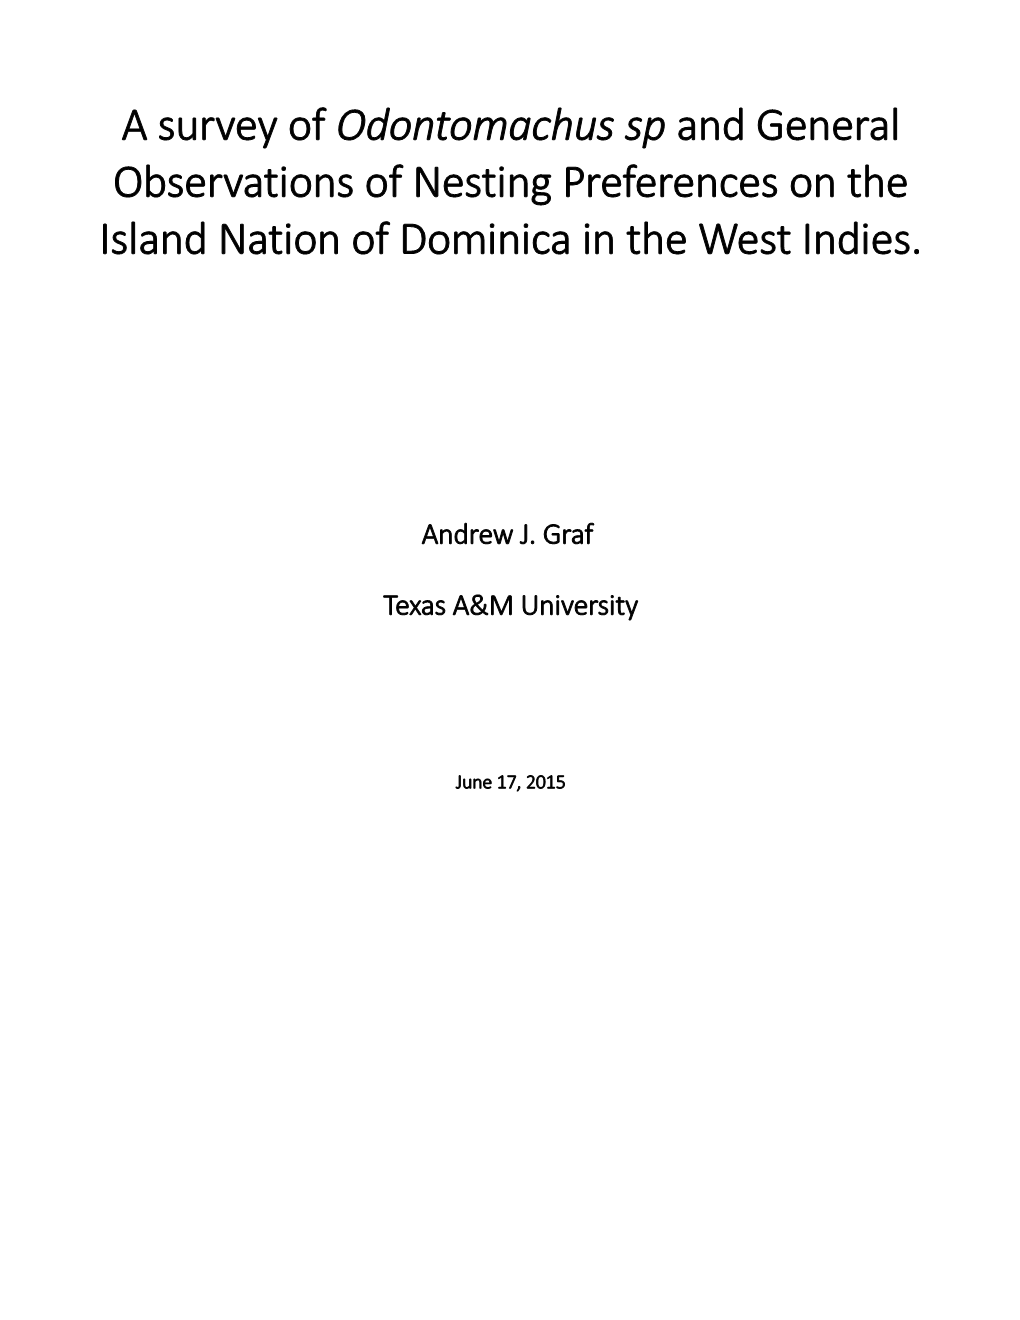 A Survey of Odontomachus Sp and General Observations of Nesting Preferences on the Island Nation of Dominica in the West Indies